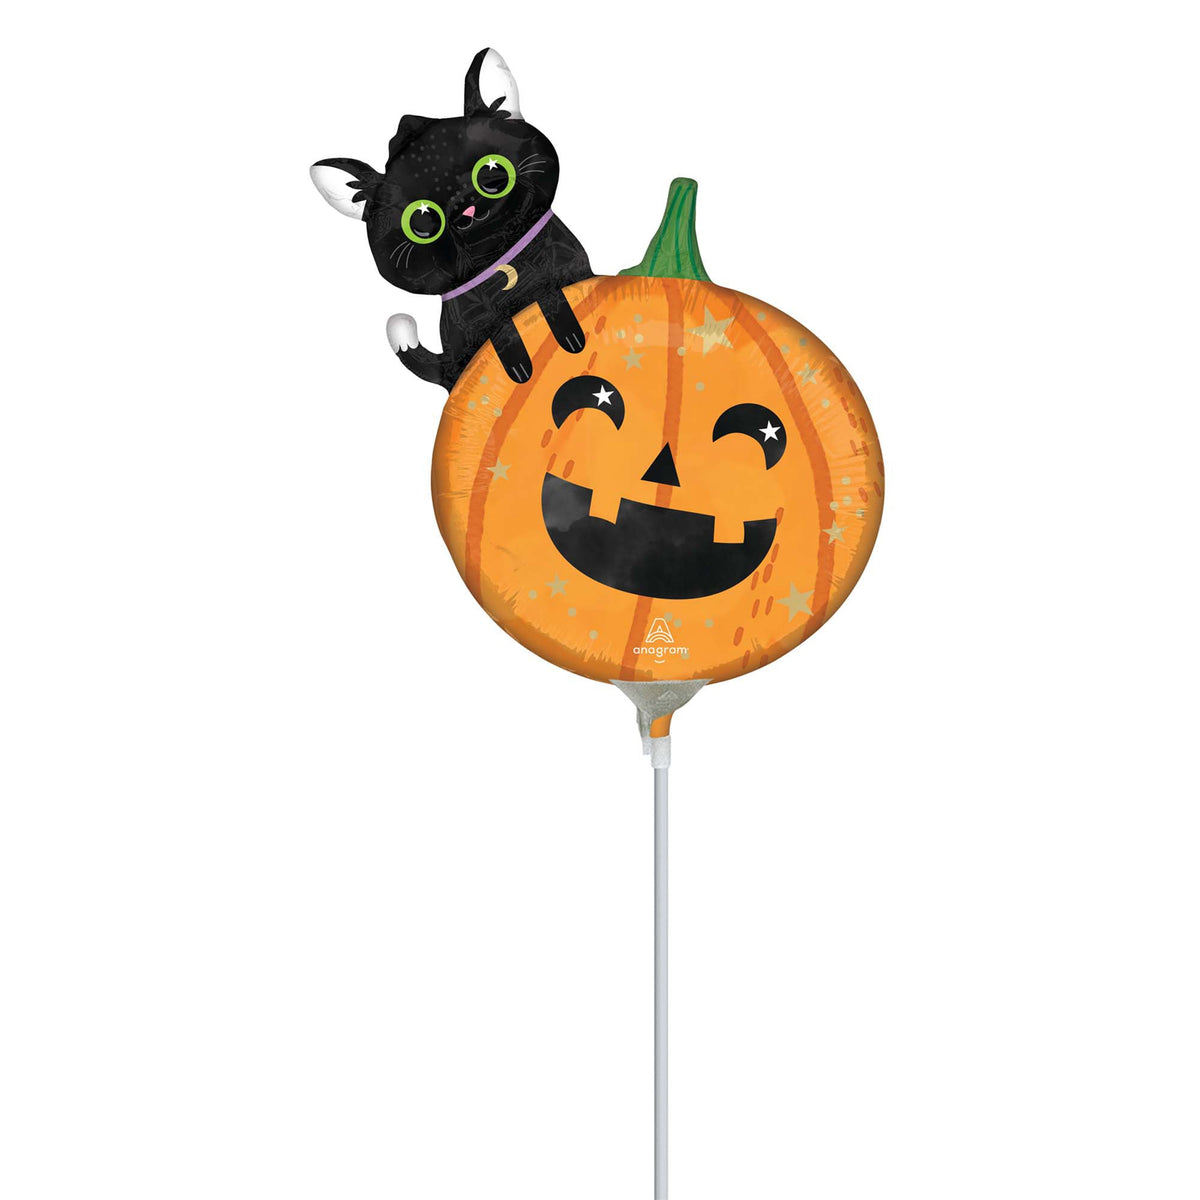 LE GROUPE BLC INTL INC Balloons Cat and Pumpkin Air-Filled Balloon, 14 Inches, 1 Count 026635461085